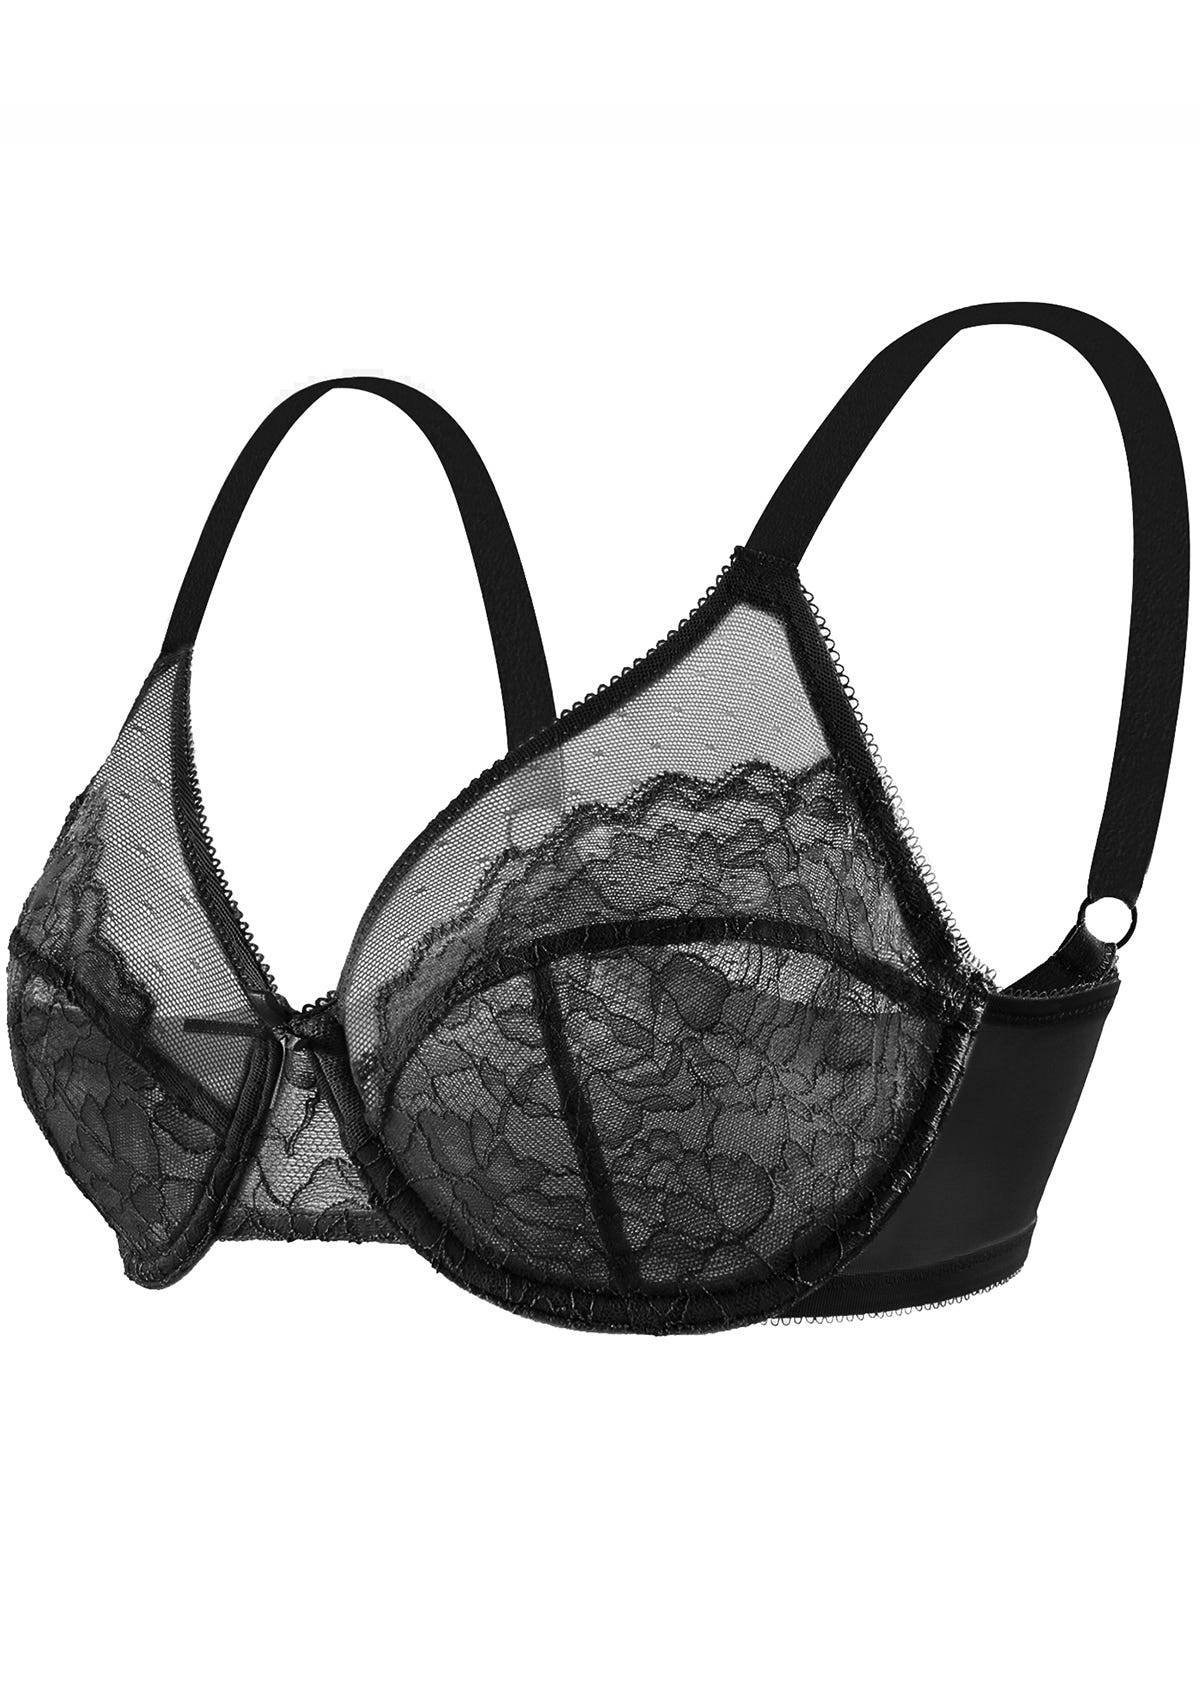 Bras for Travel and Adventure: Embrace Comfort and Versatility on